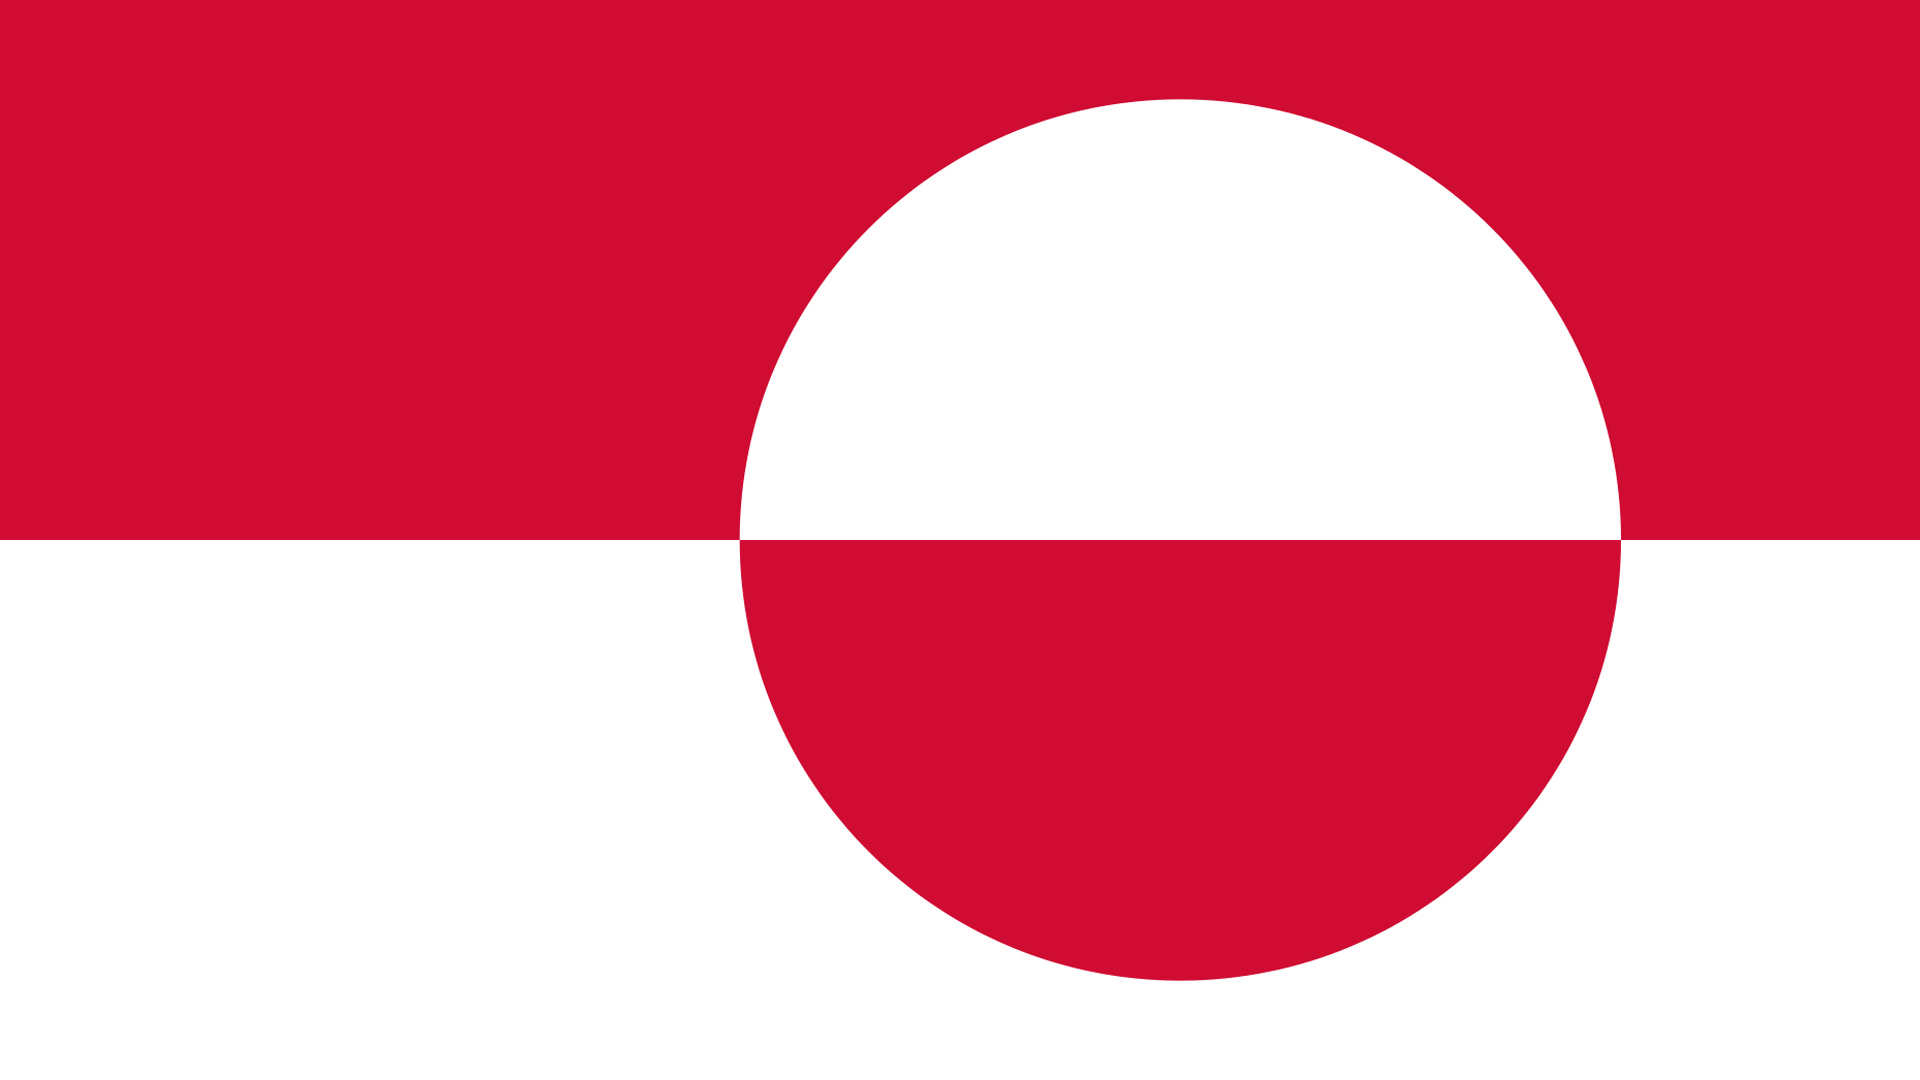 This could be a Greenland flag 